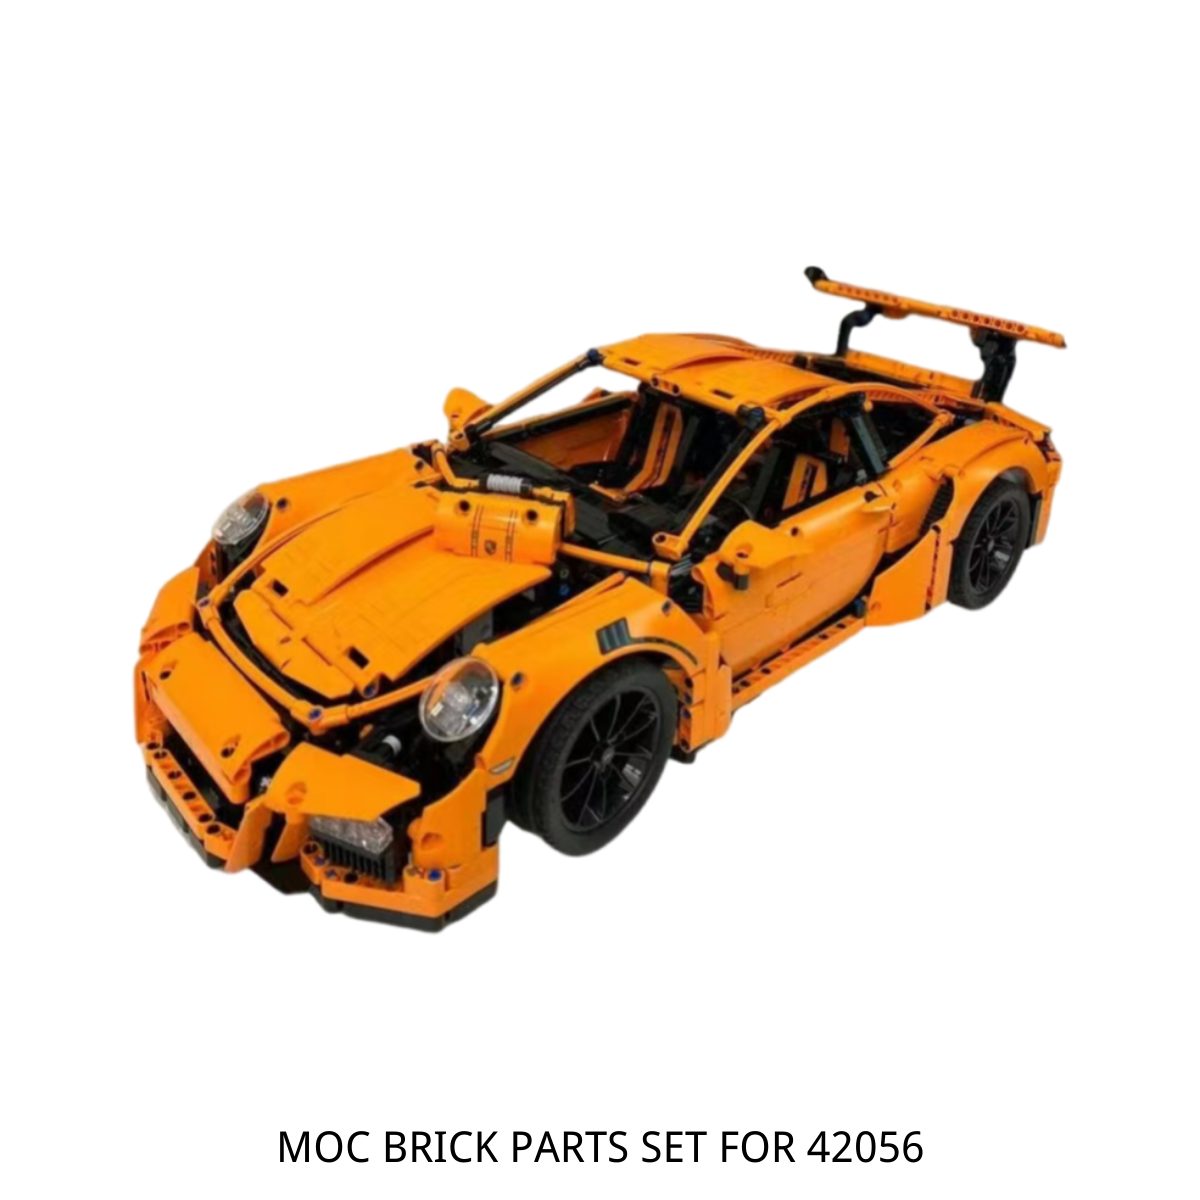 LEGO MOC 42056 Porsche GT3 RS Upgraded MOC (more realistic) by  BrickStructor